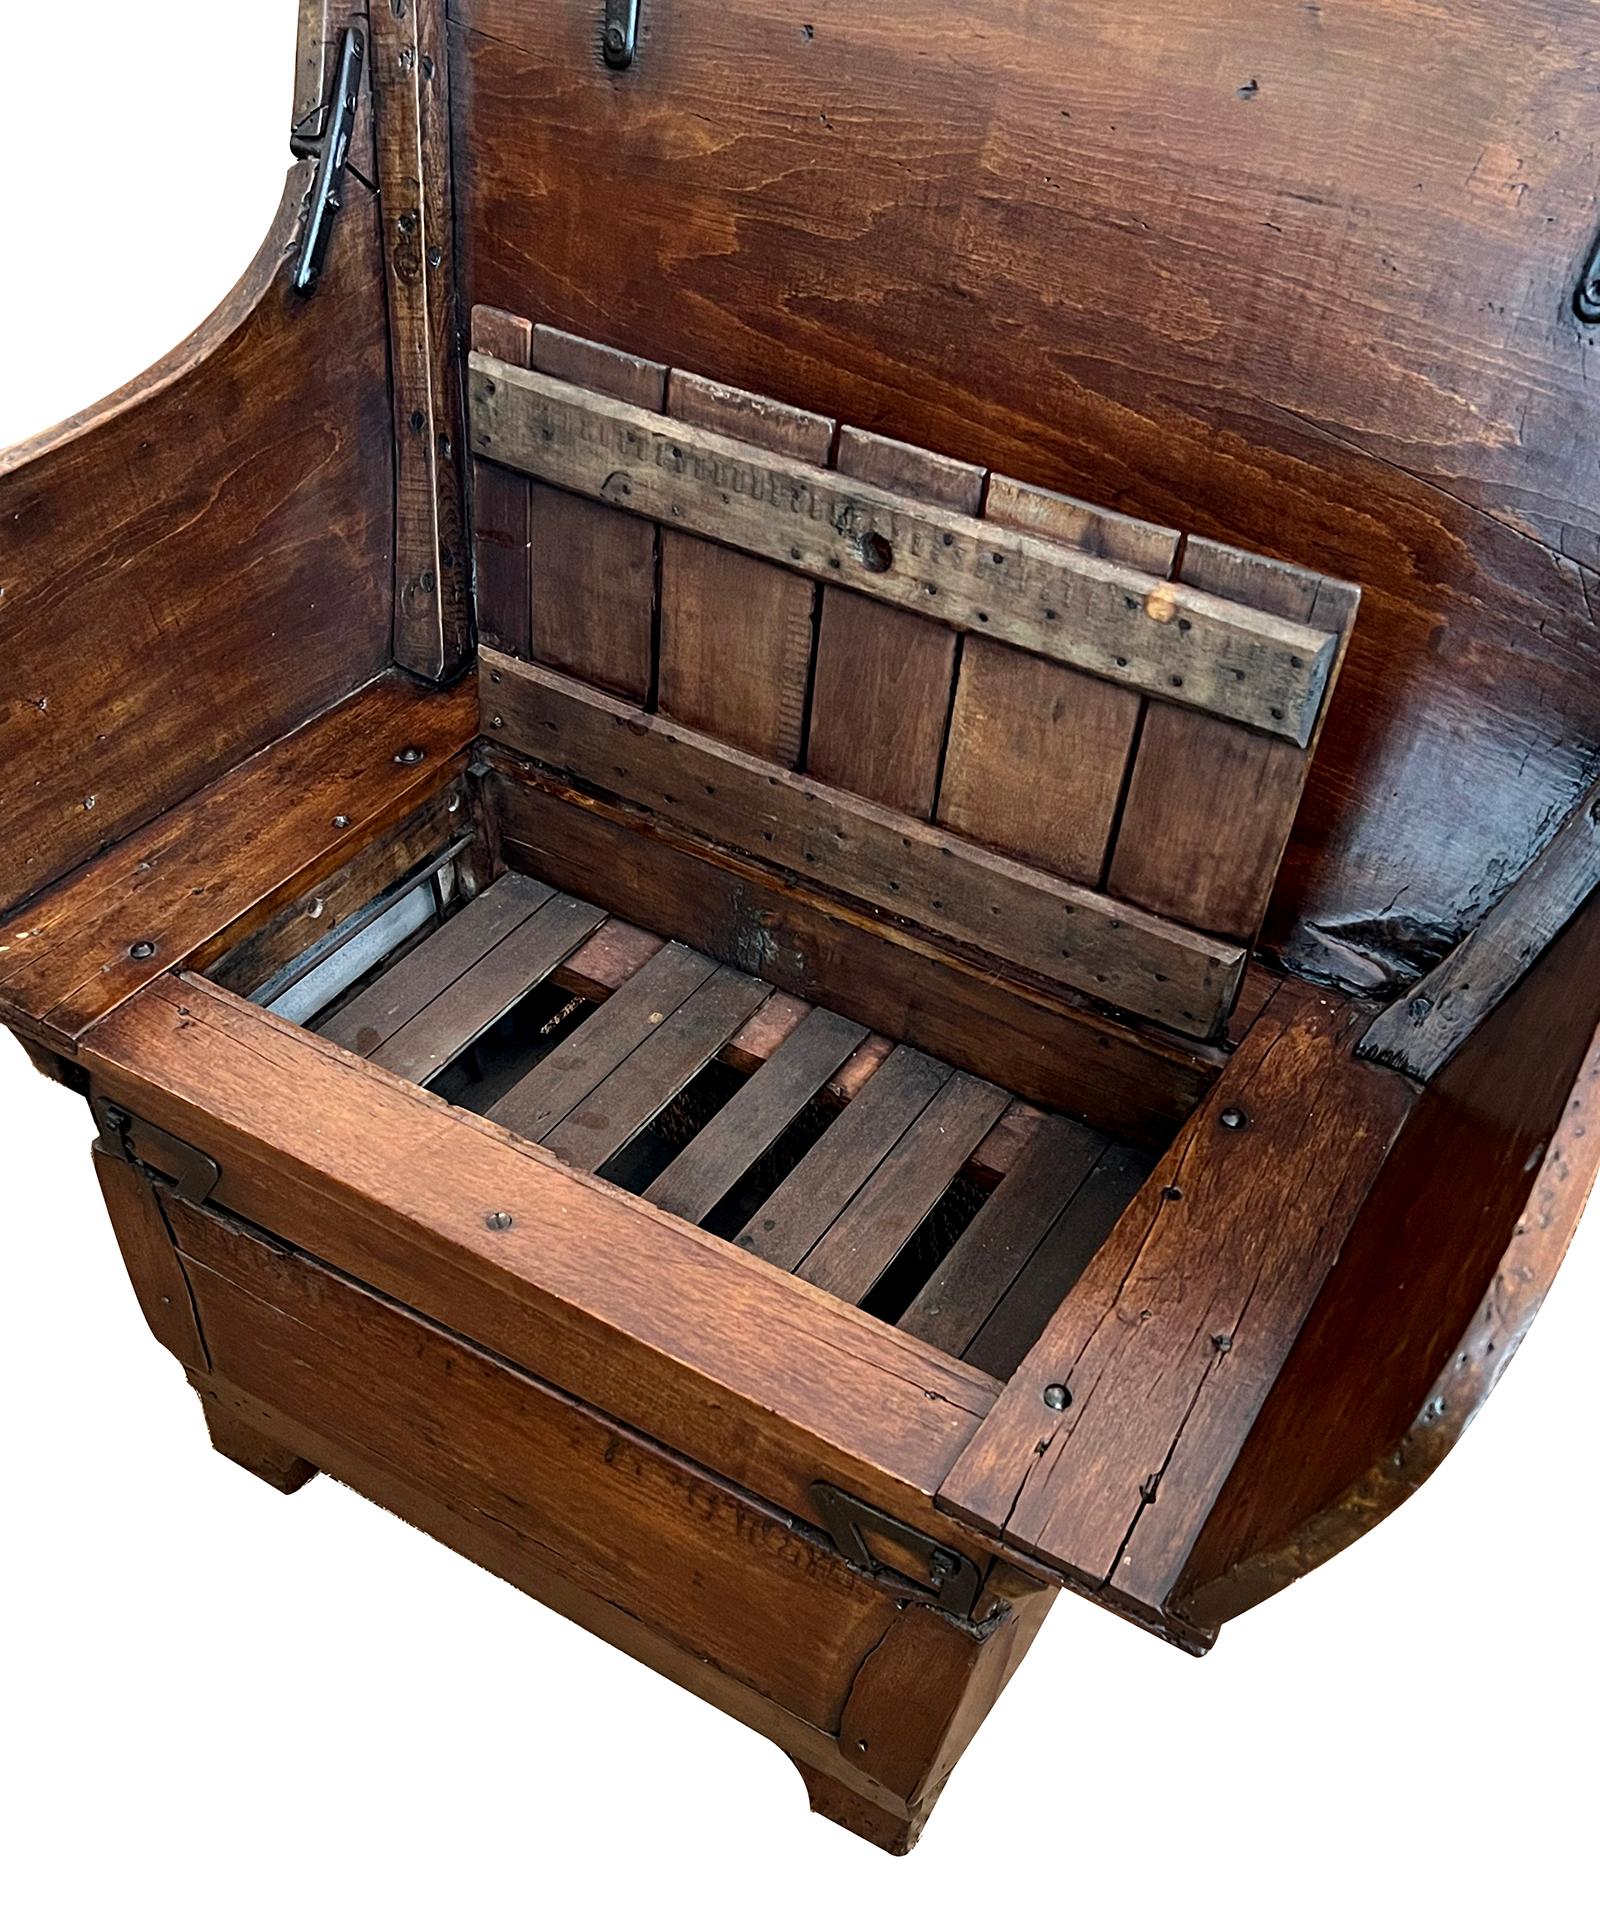 of generous proportion with flared back and arched crest above a seat with a small hinged compartment; the seat back with carved paneled reserves; raised on a wooden base with later supports; the whole fitted with iron hardware; new channeled